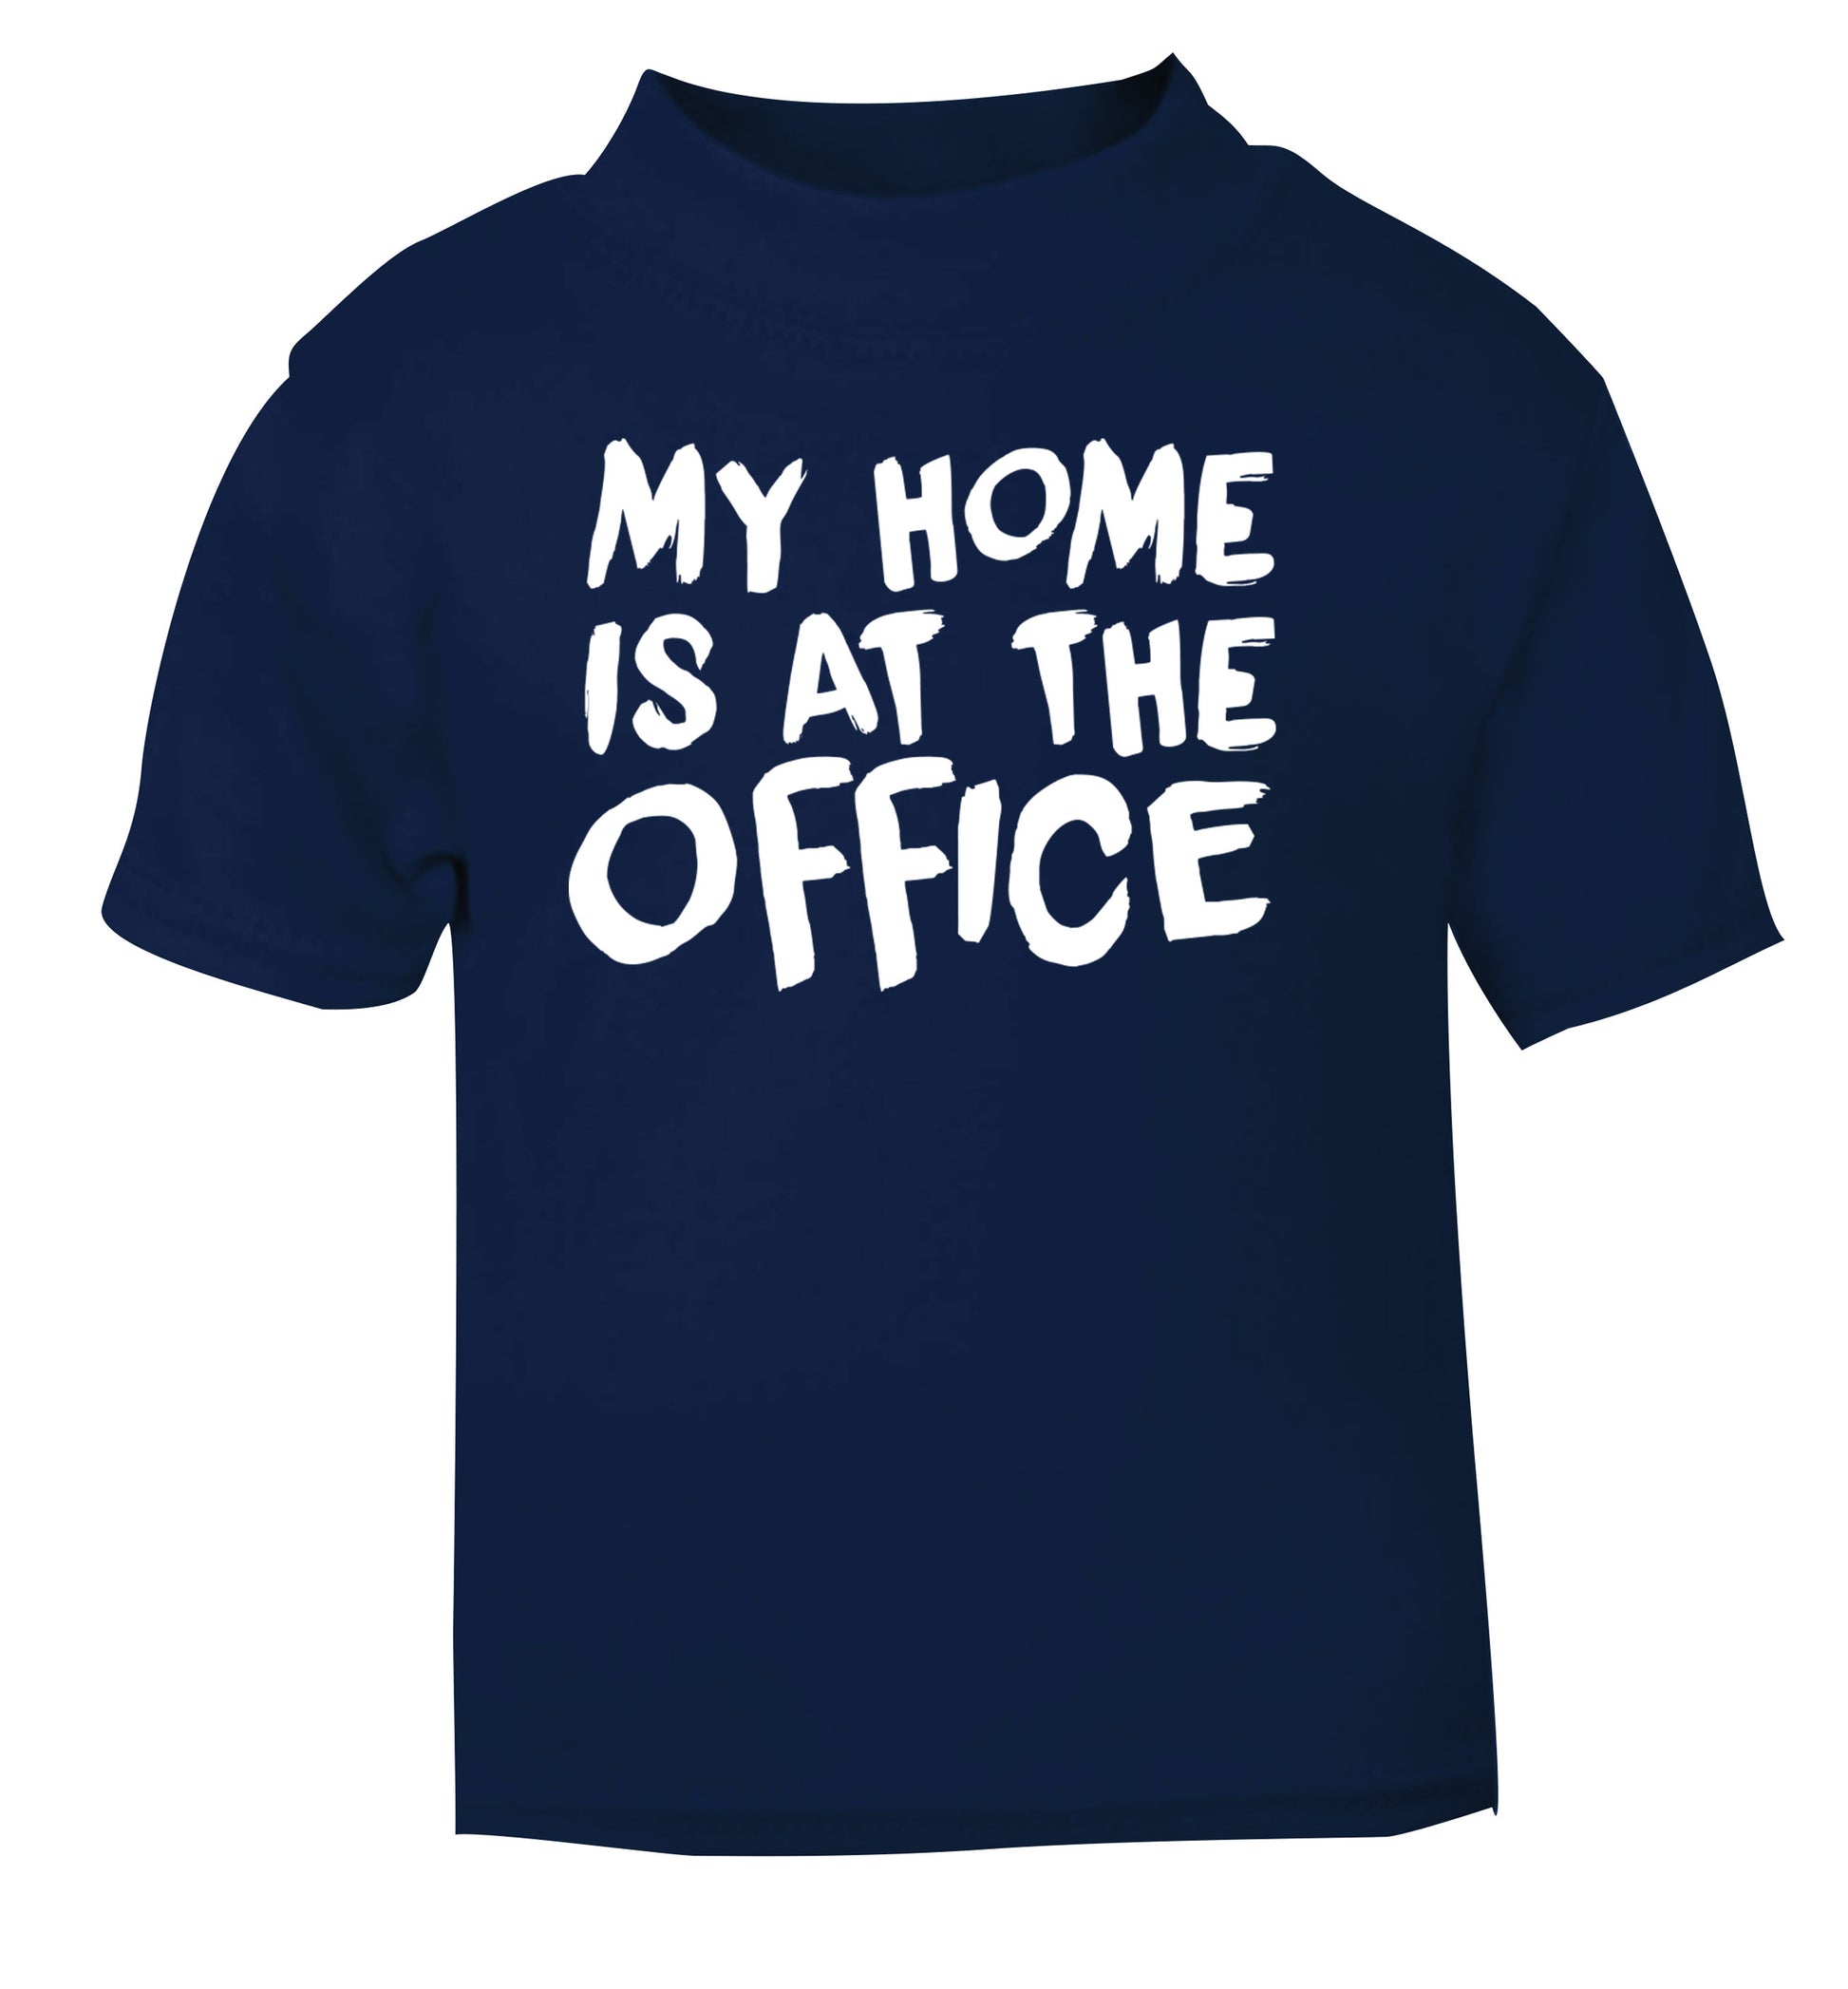 My home is at the office navy Baby Toddler Tshirt 2 Years